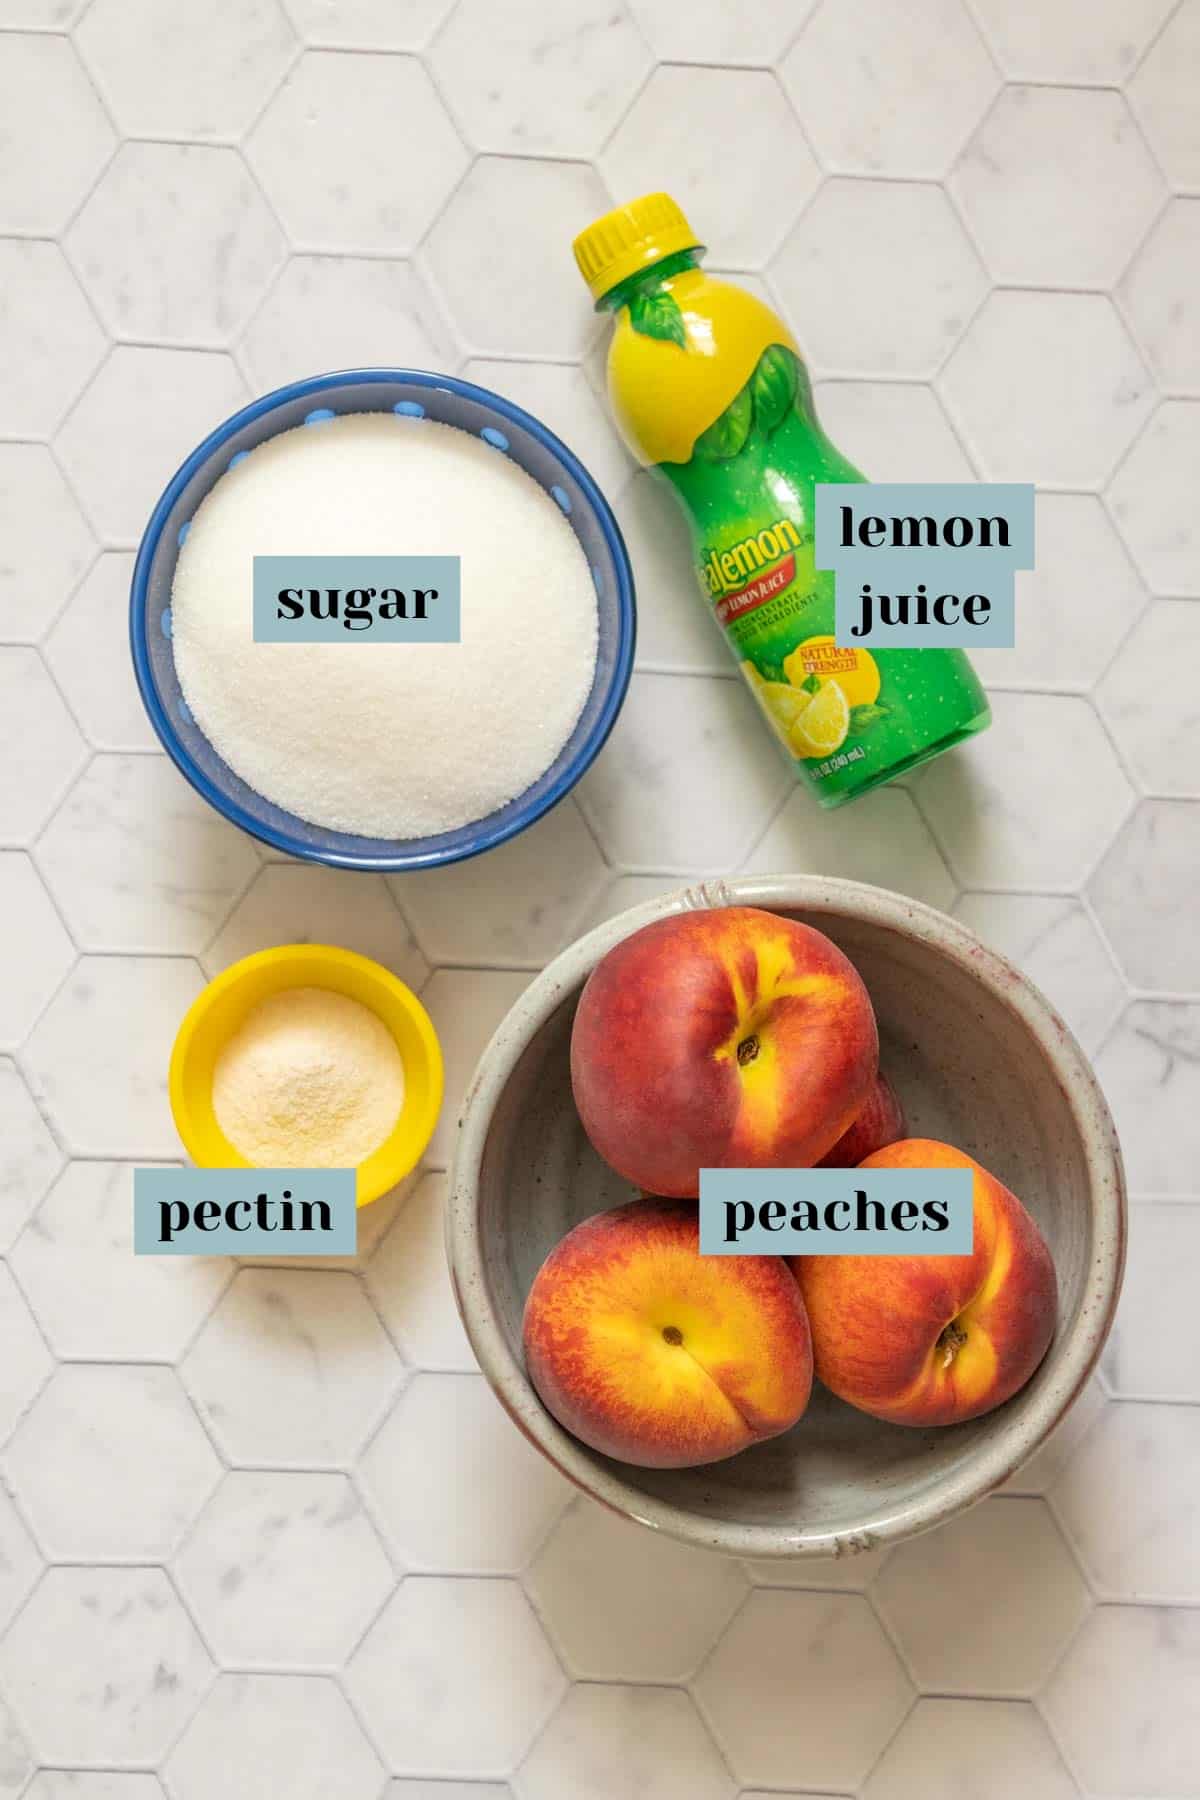 Ingredients for peach jam on a tile surface with labels.